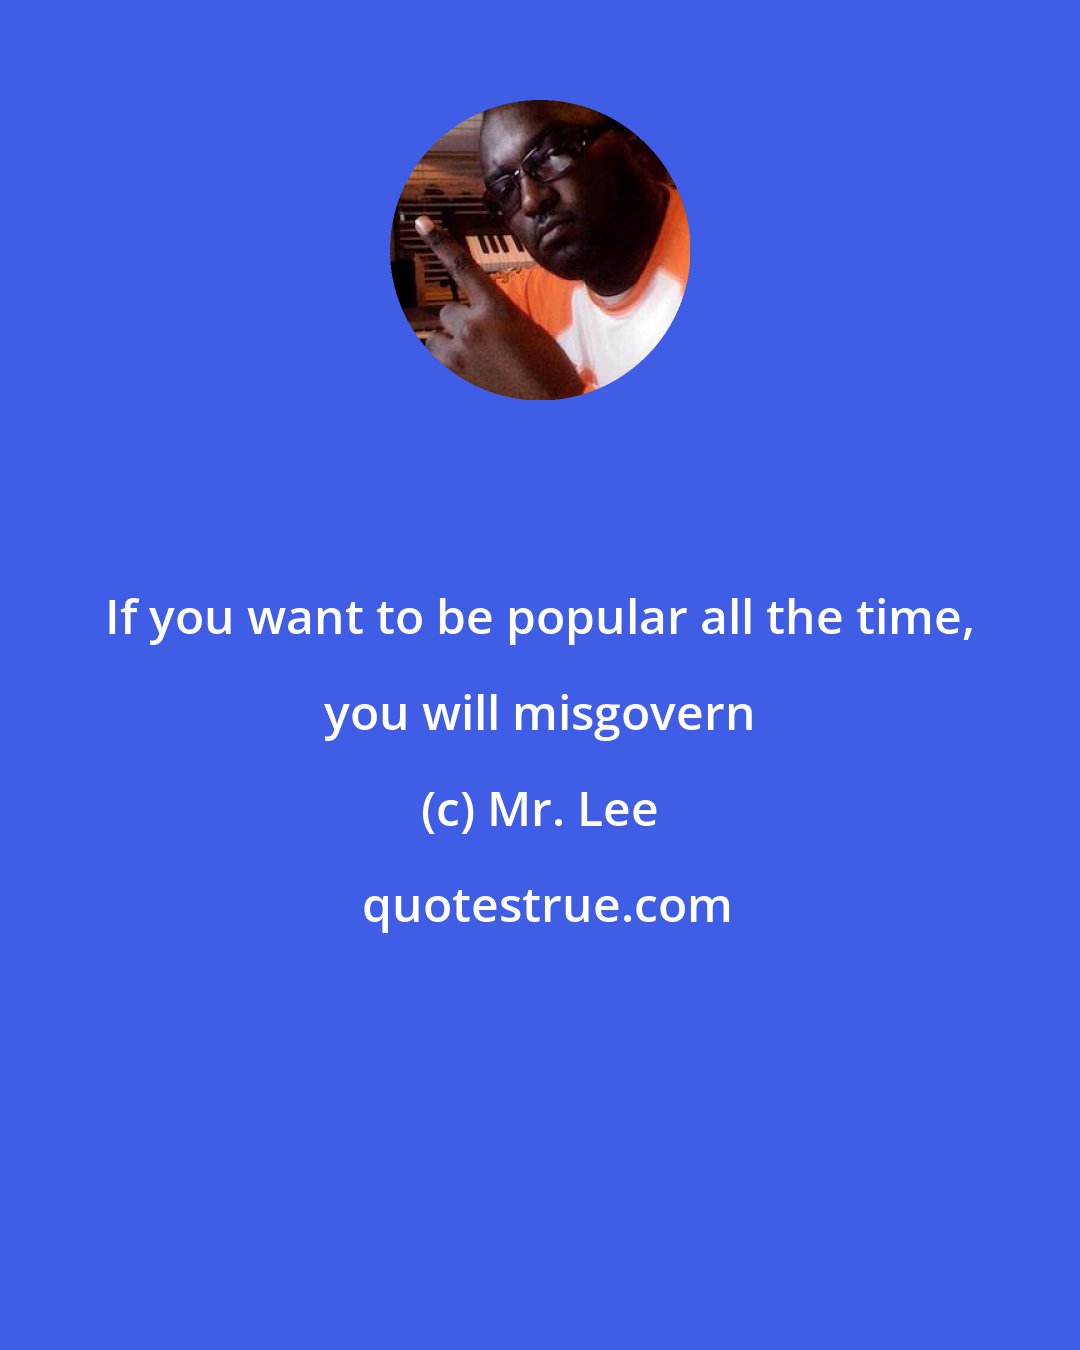 Mr. Lee: If you want to be popular all the time, you will misgovern